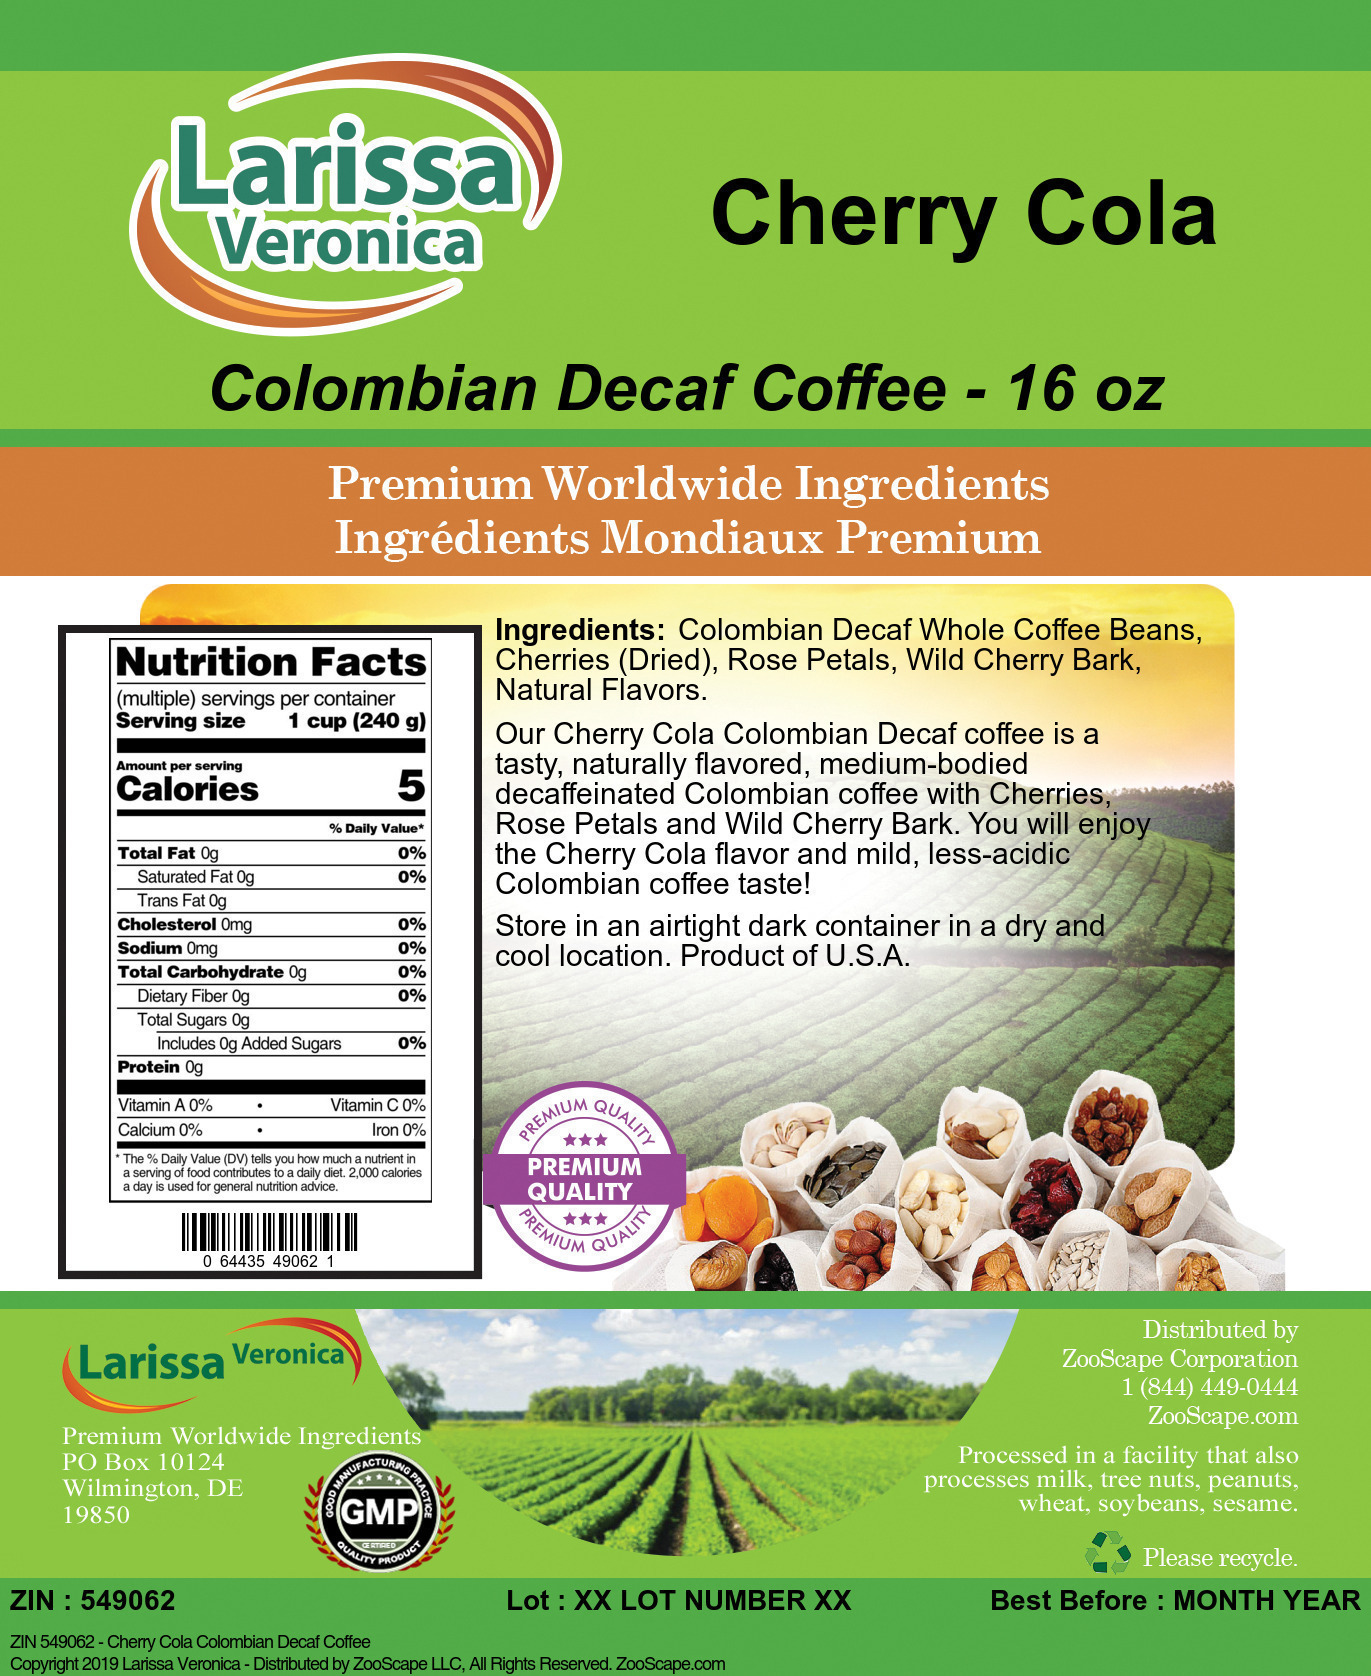 Cherry Cola Colombian Decaf Coffee - Label